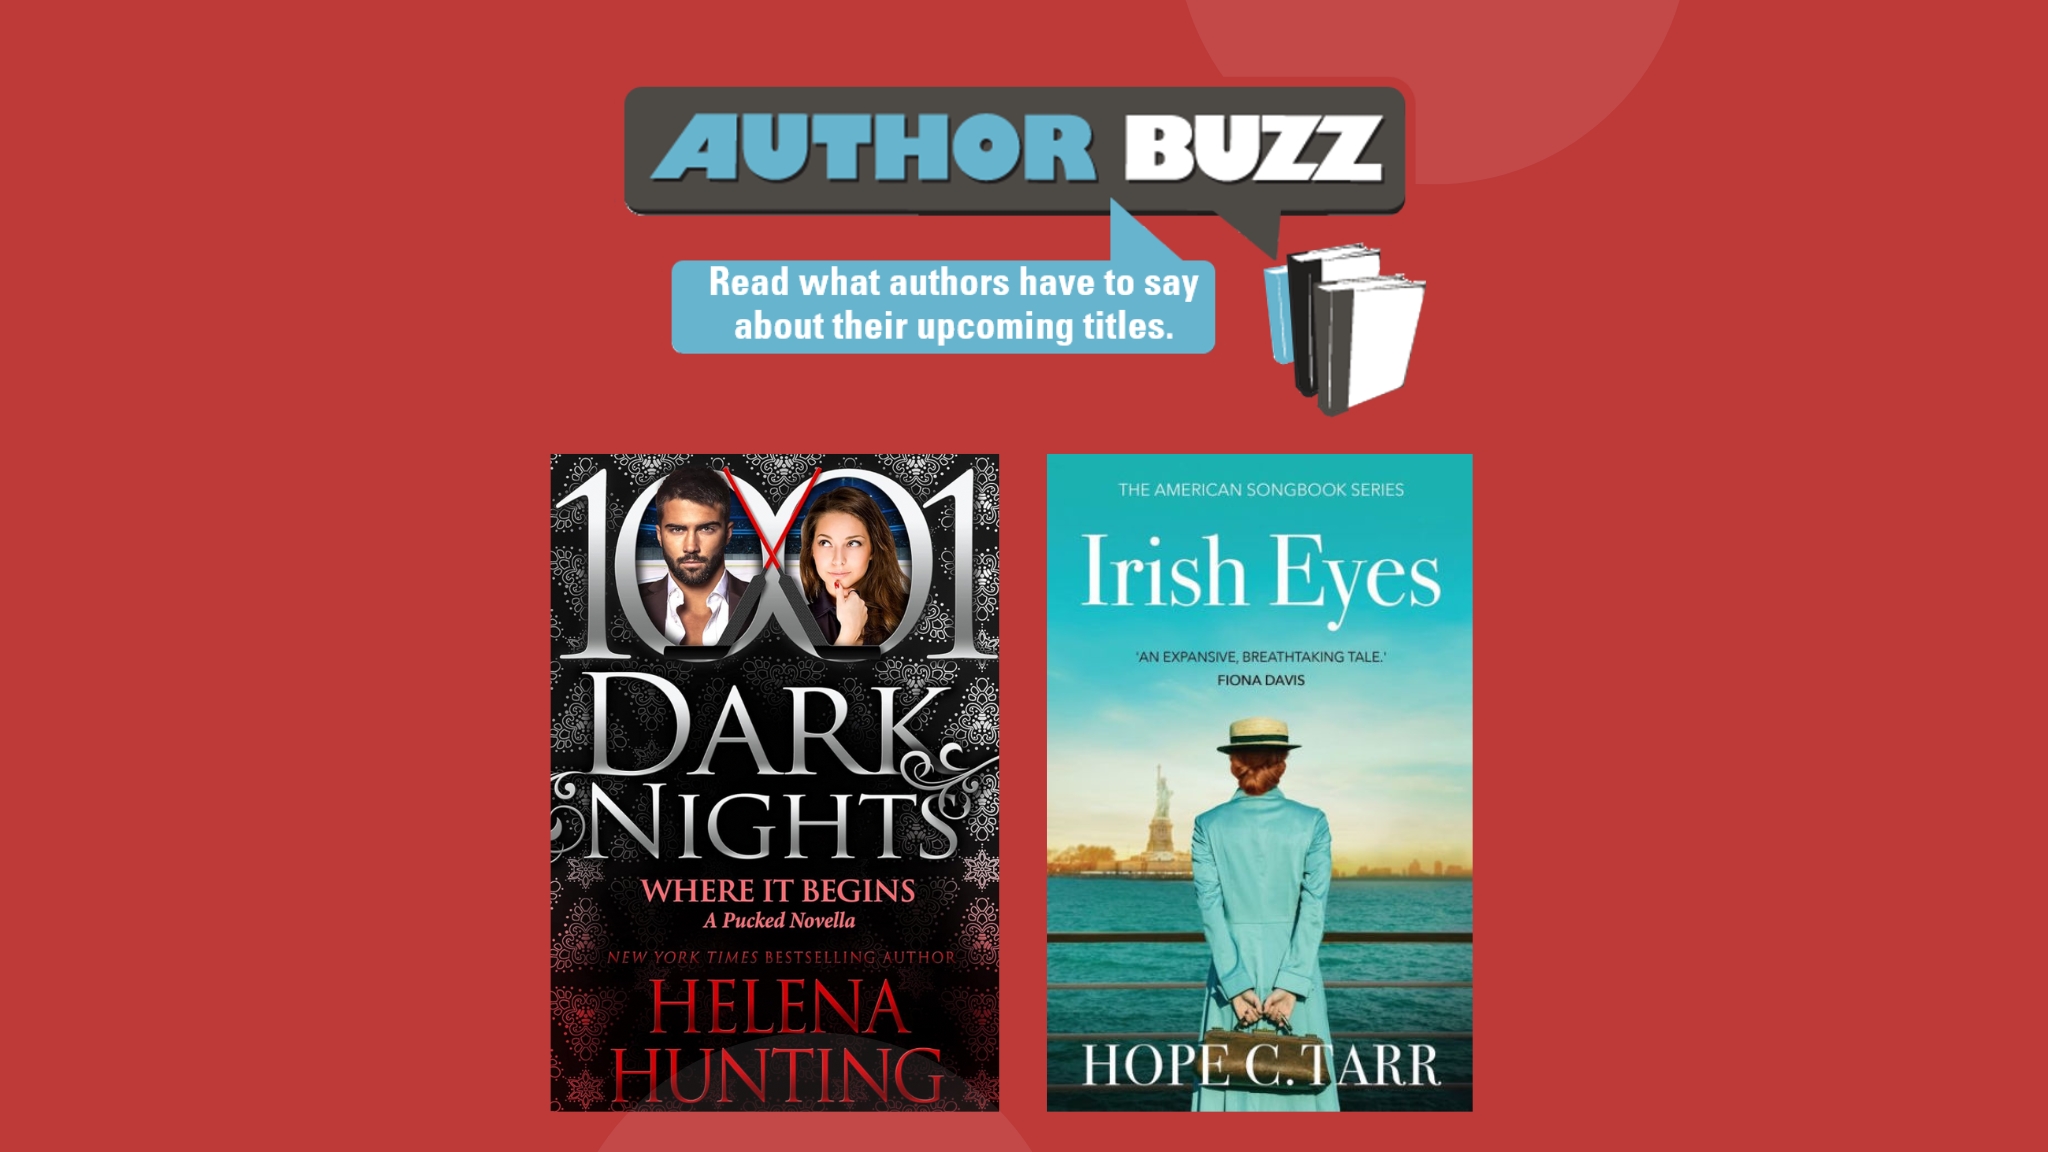 AuthorBuzz: Meet-Cute Between Single Parents and Giveaway for Historical Irish Romance